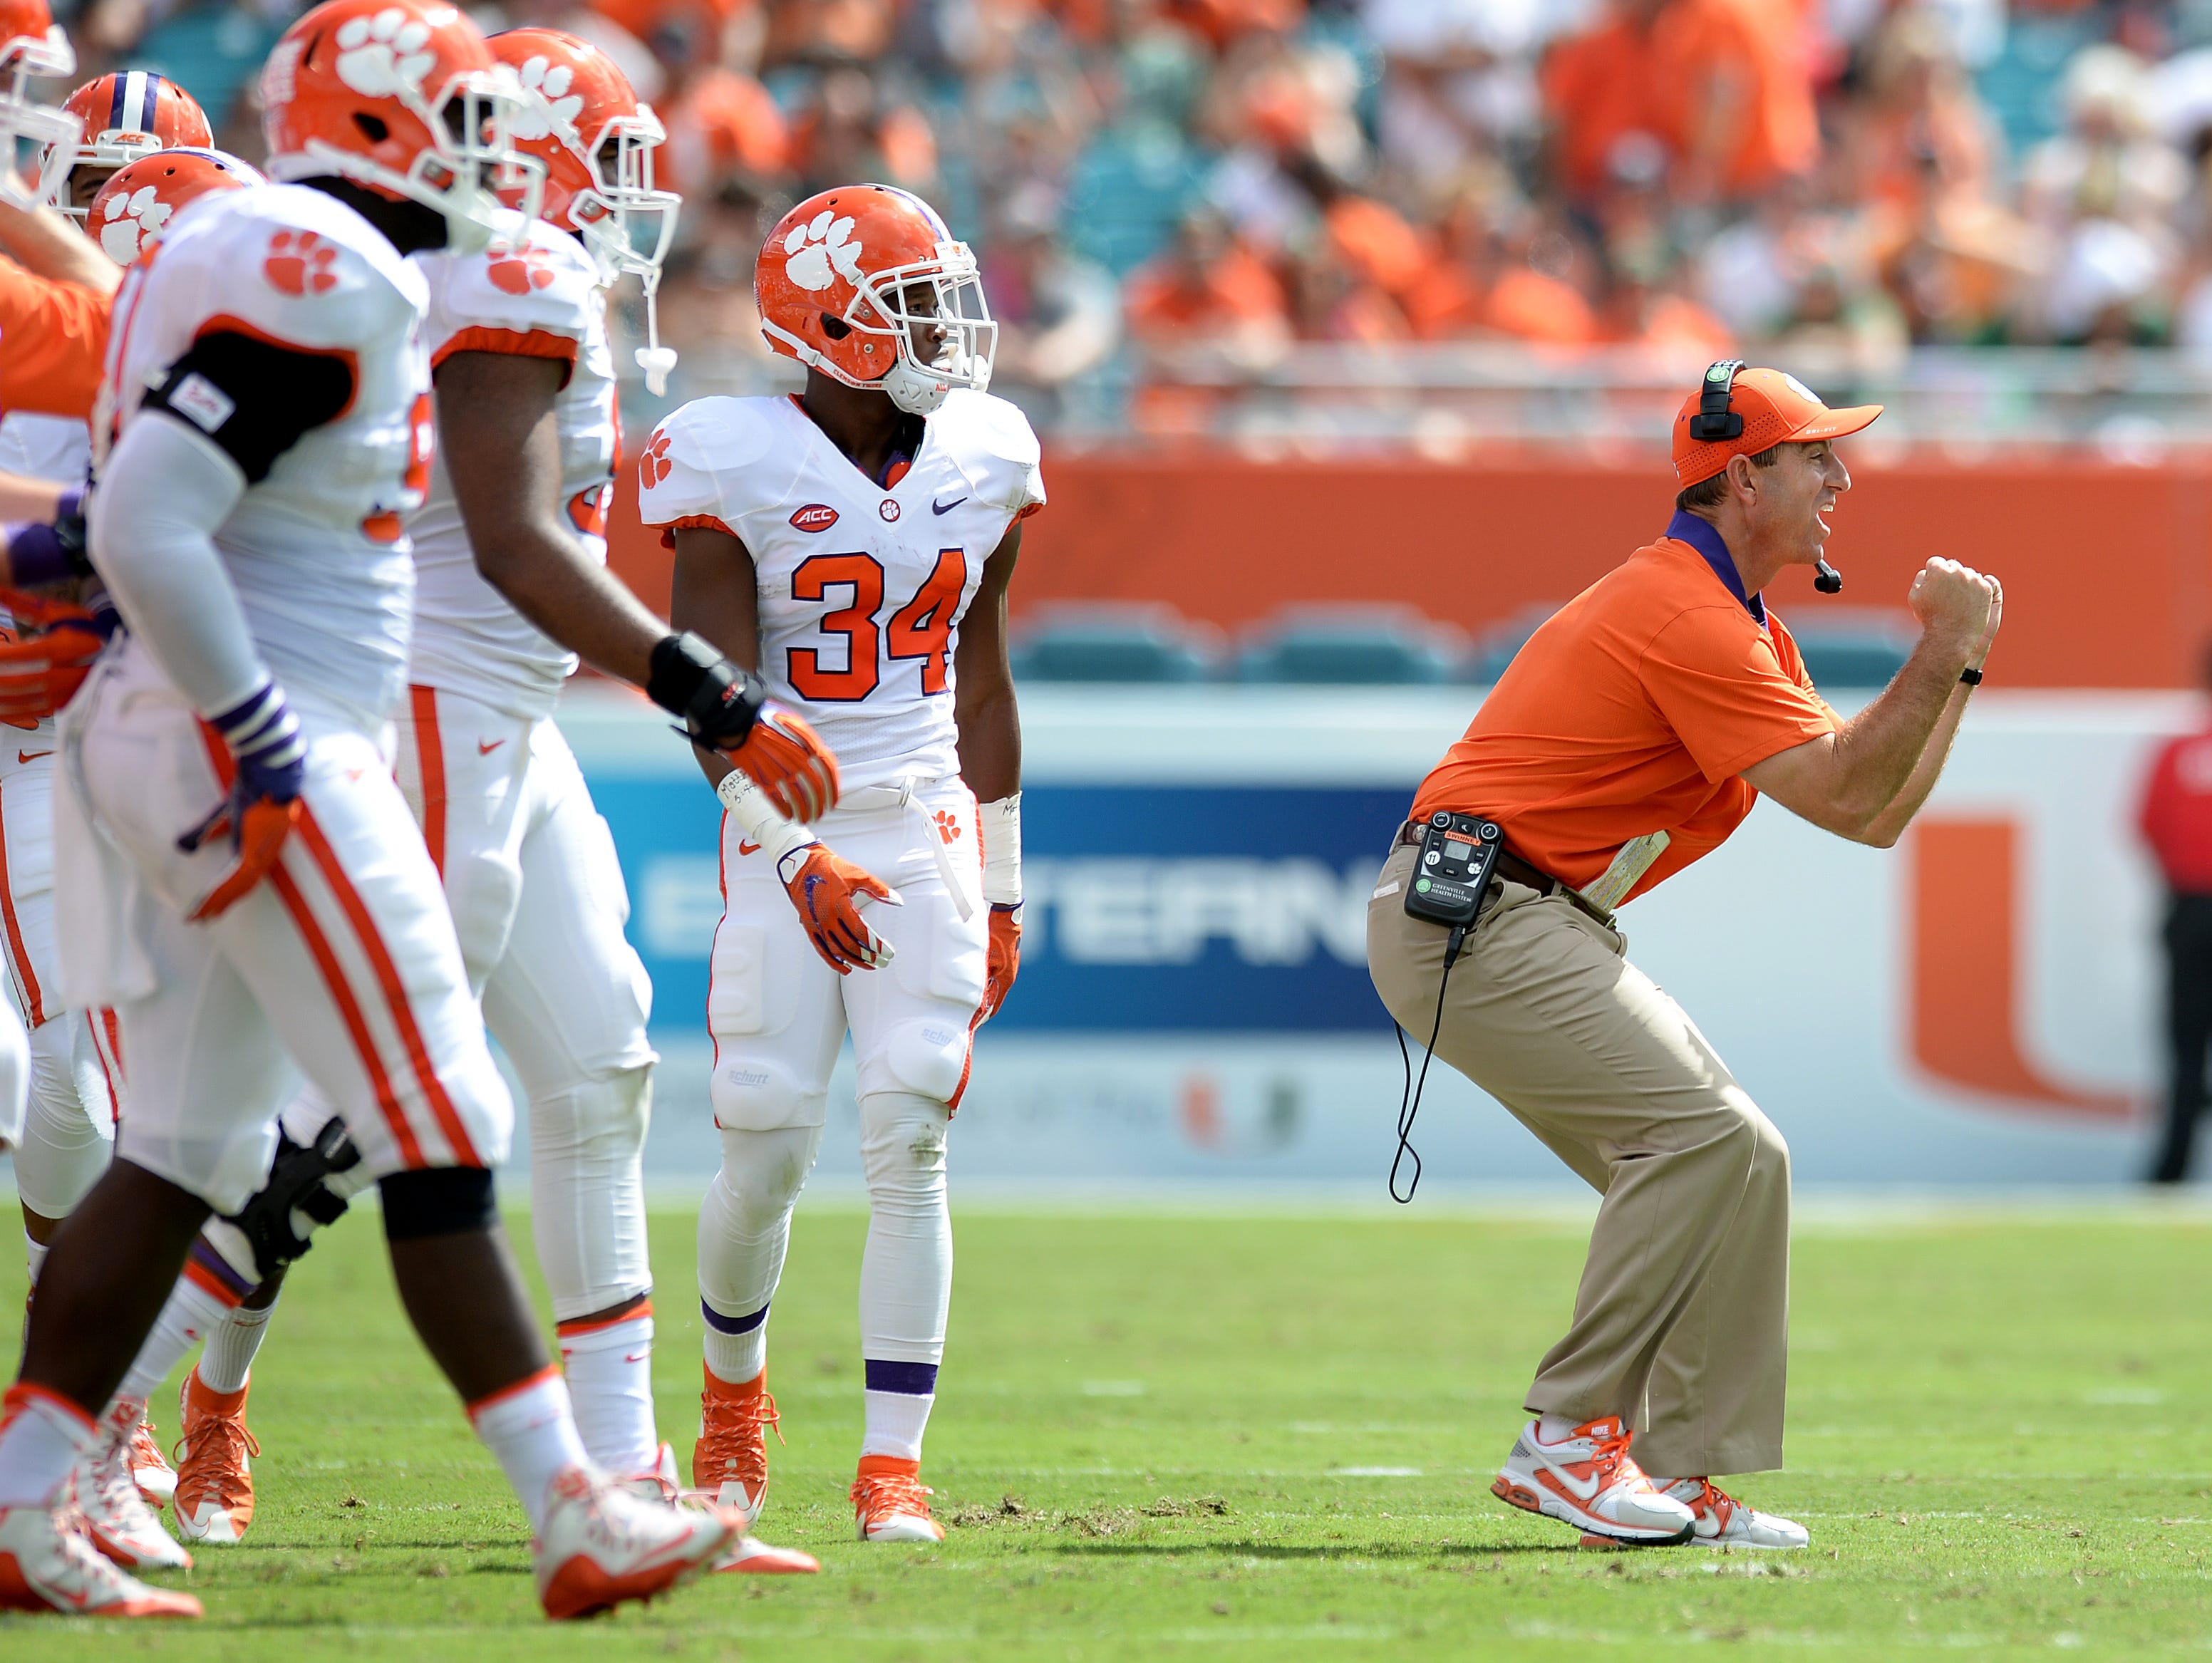 Clemson head coach Dabo Swinney reacts after a defensive stop against Miami during the 1st quarter Saturday, Oct. 24, 2015, in Miami Gardens, Fla.